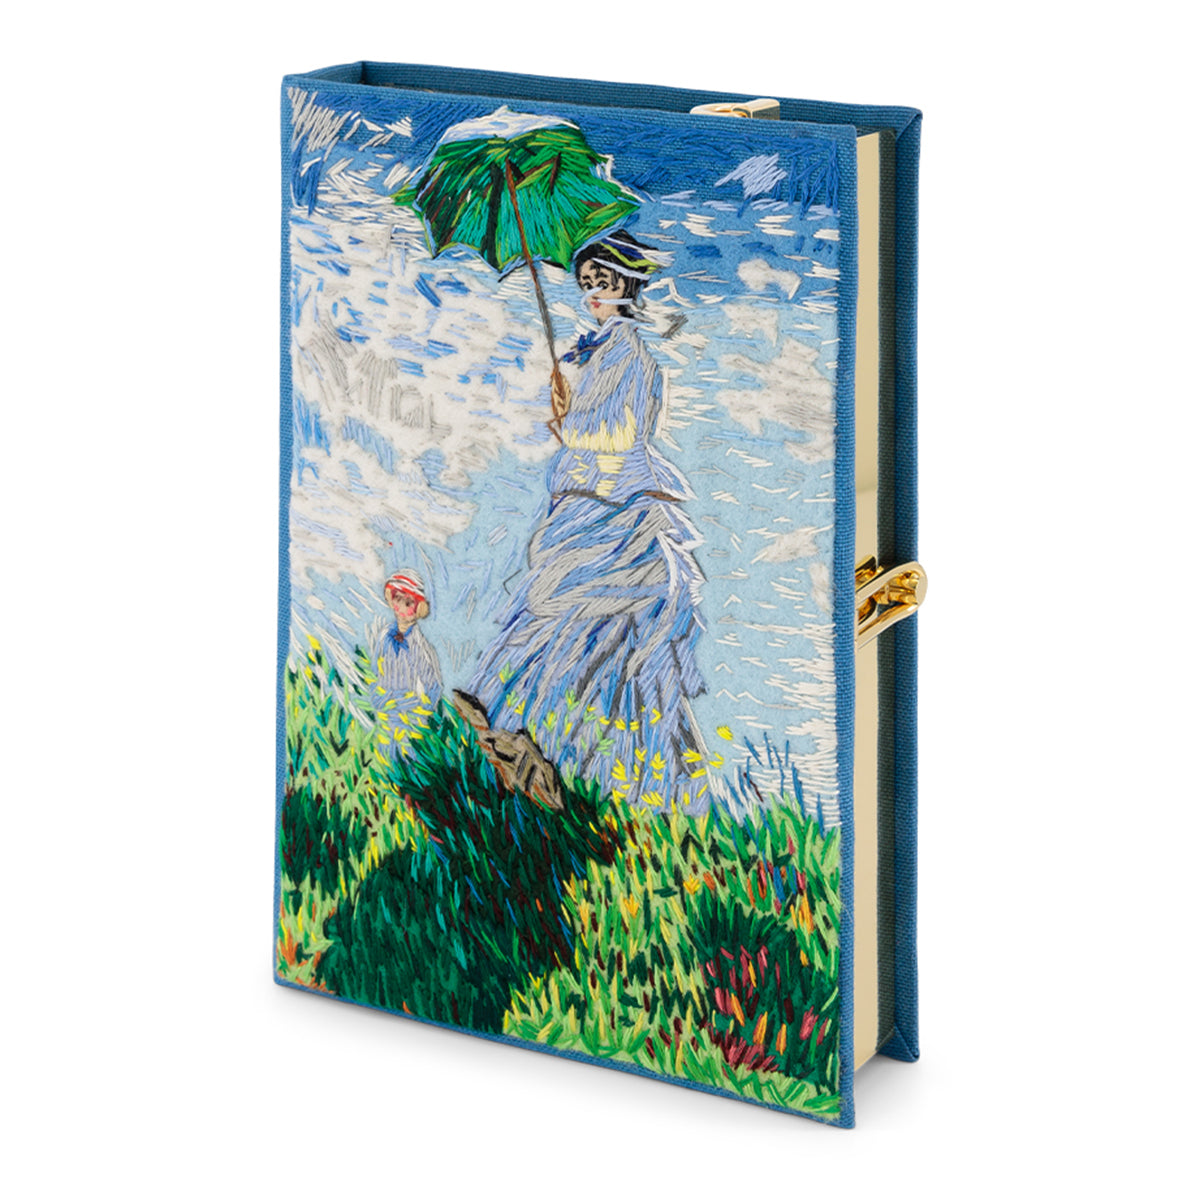 Monet "Femme A L'ombrelle" Book Clutch with Strap